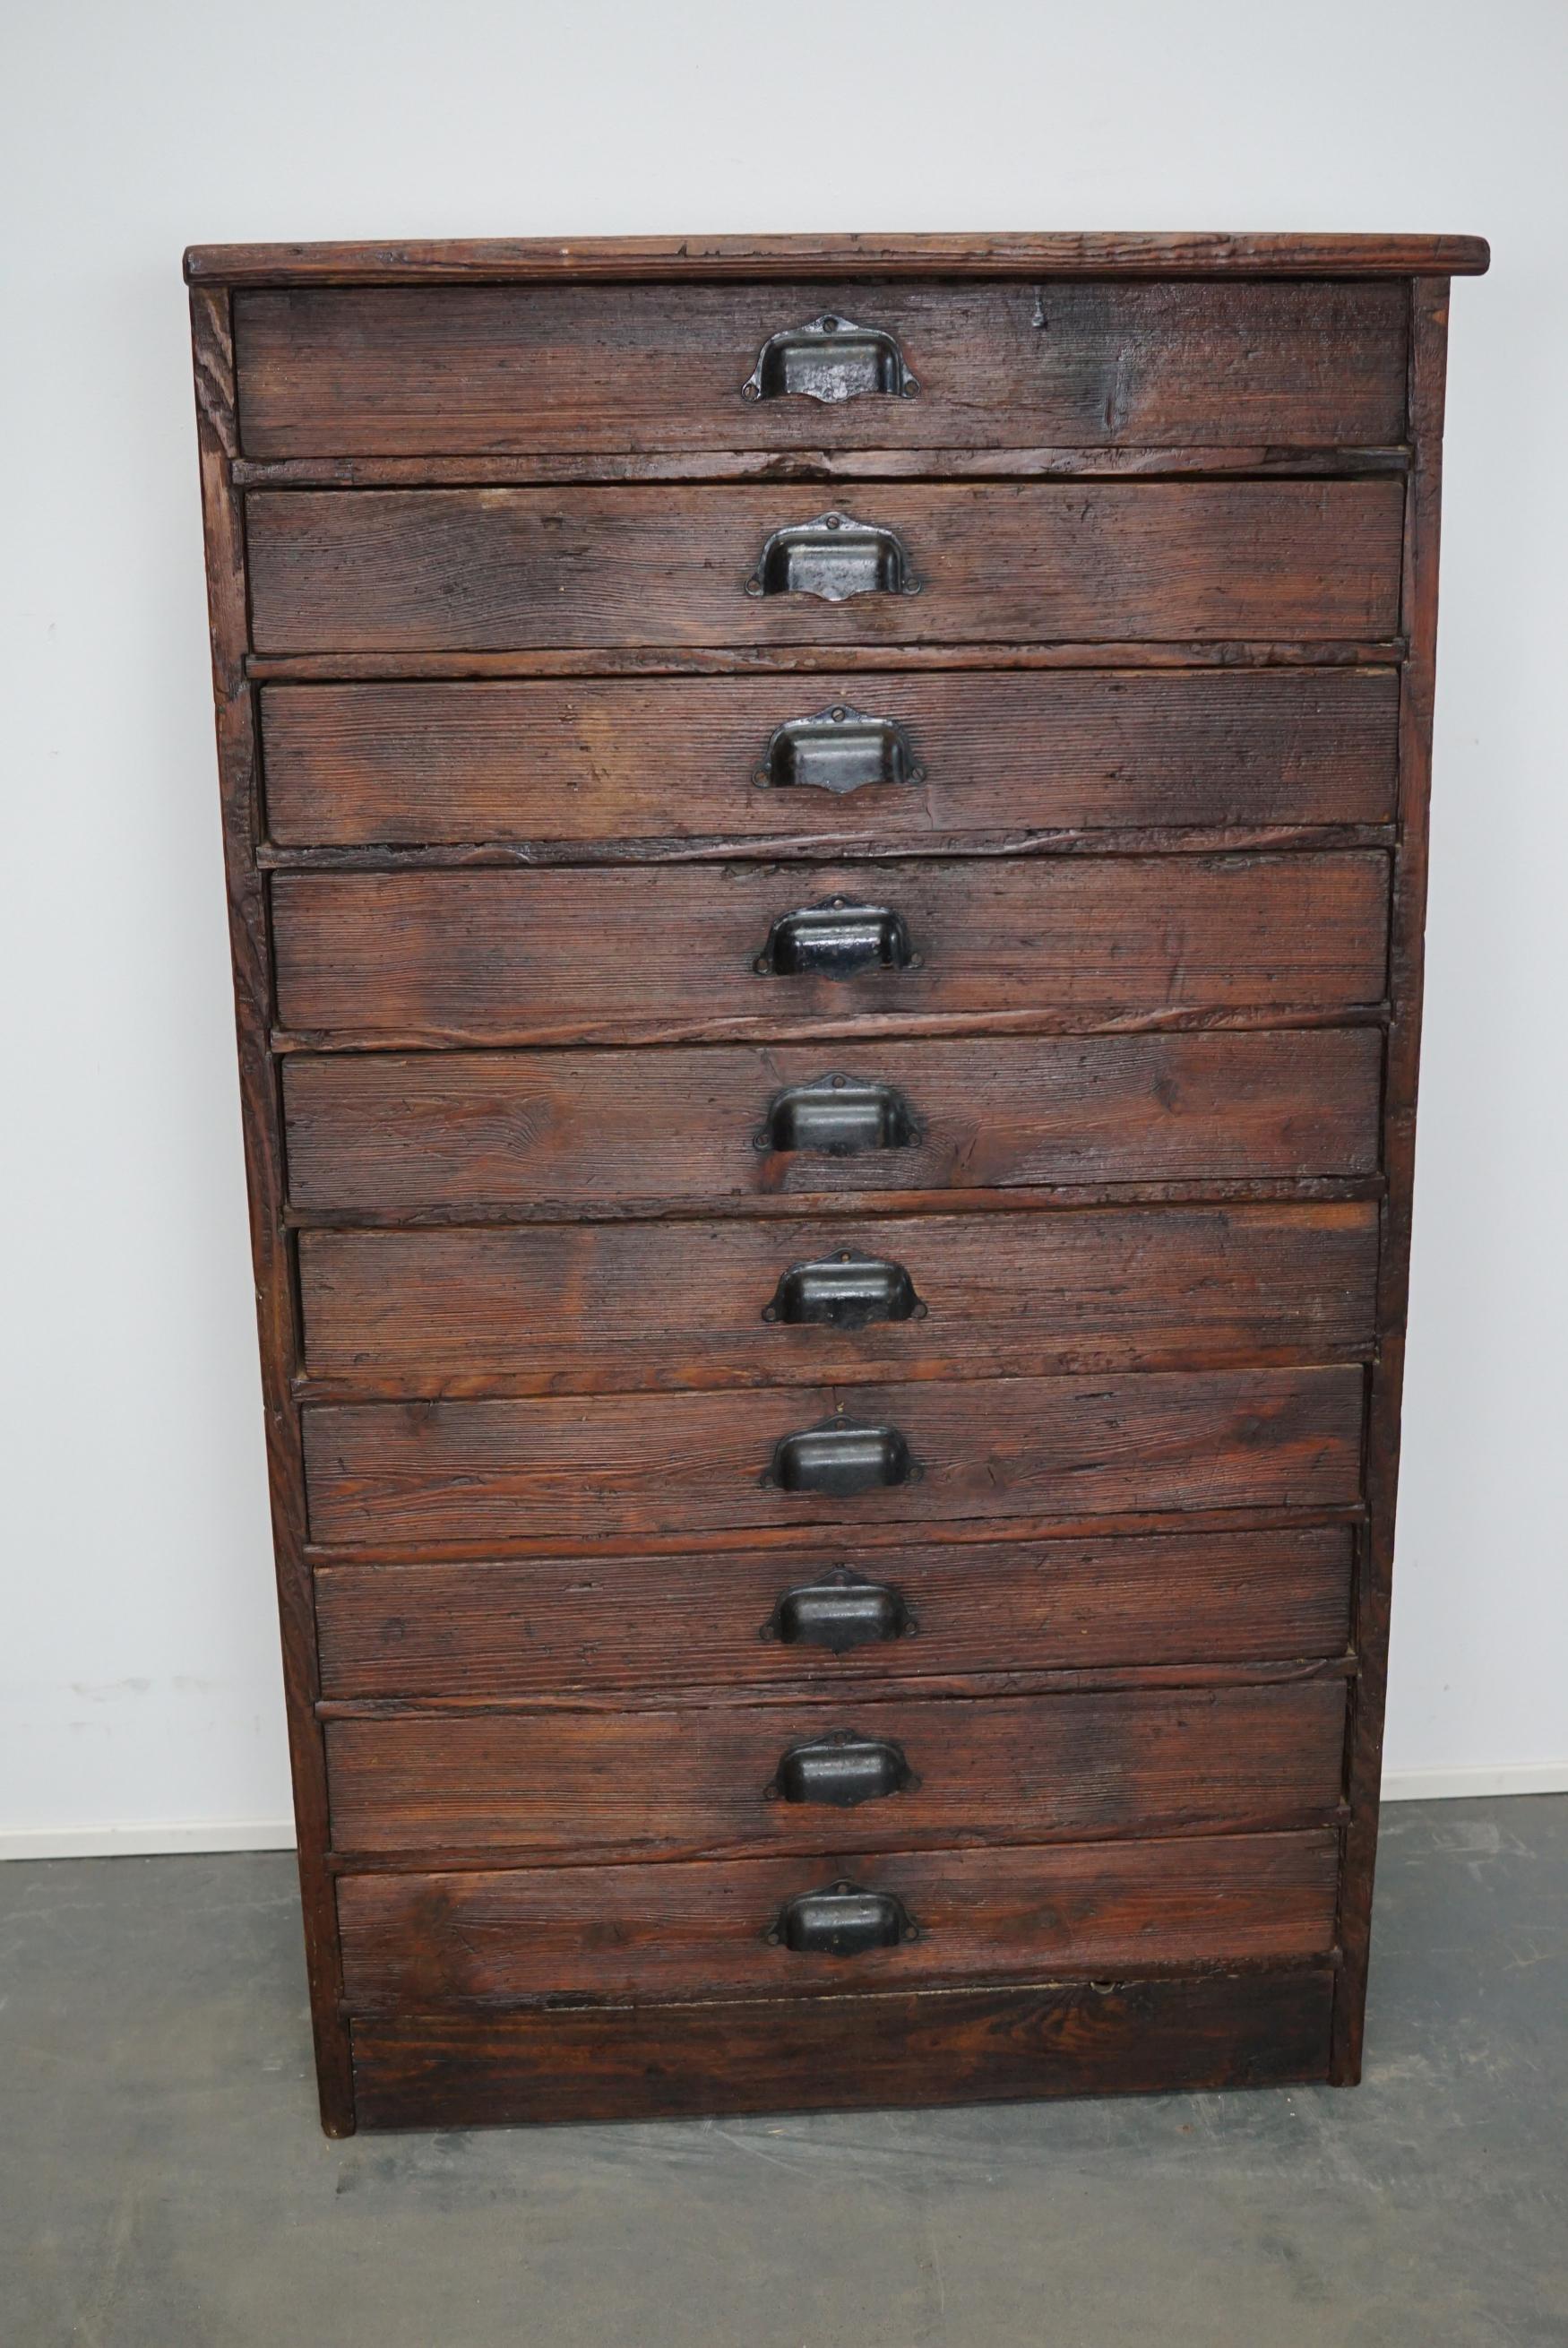 This workshop cabinet was made from pine in France circa mid-20th century. It features 10 drawers with black metal cup handles. Some of the drawers have dividers. The interior dimensions of the drawers are: DWH 29.5 x 56.5 x 6.7 cm.